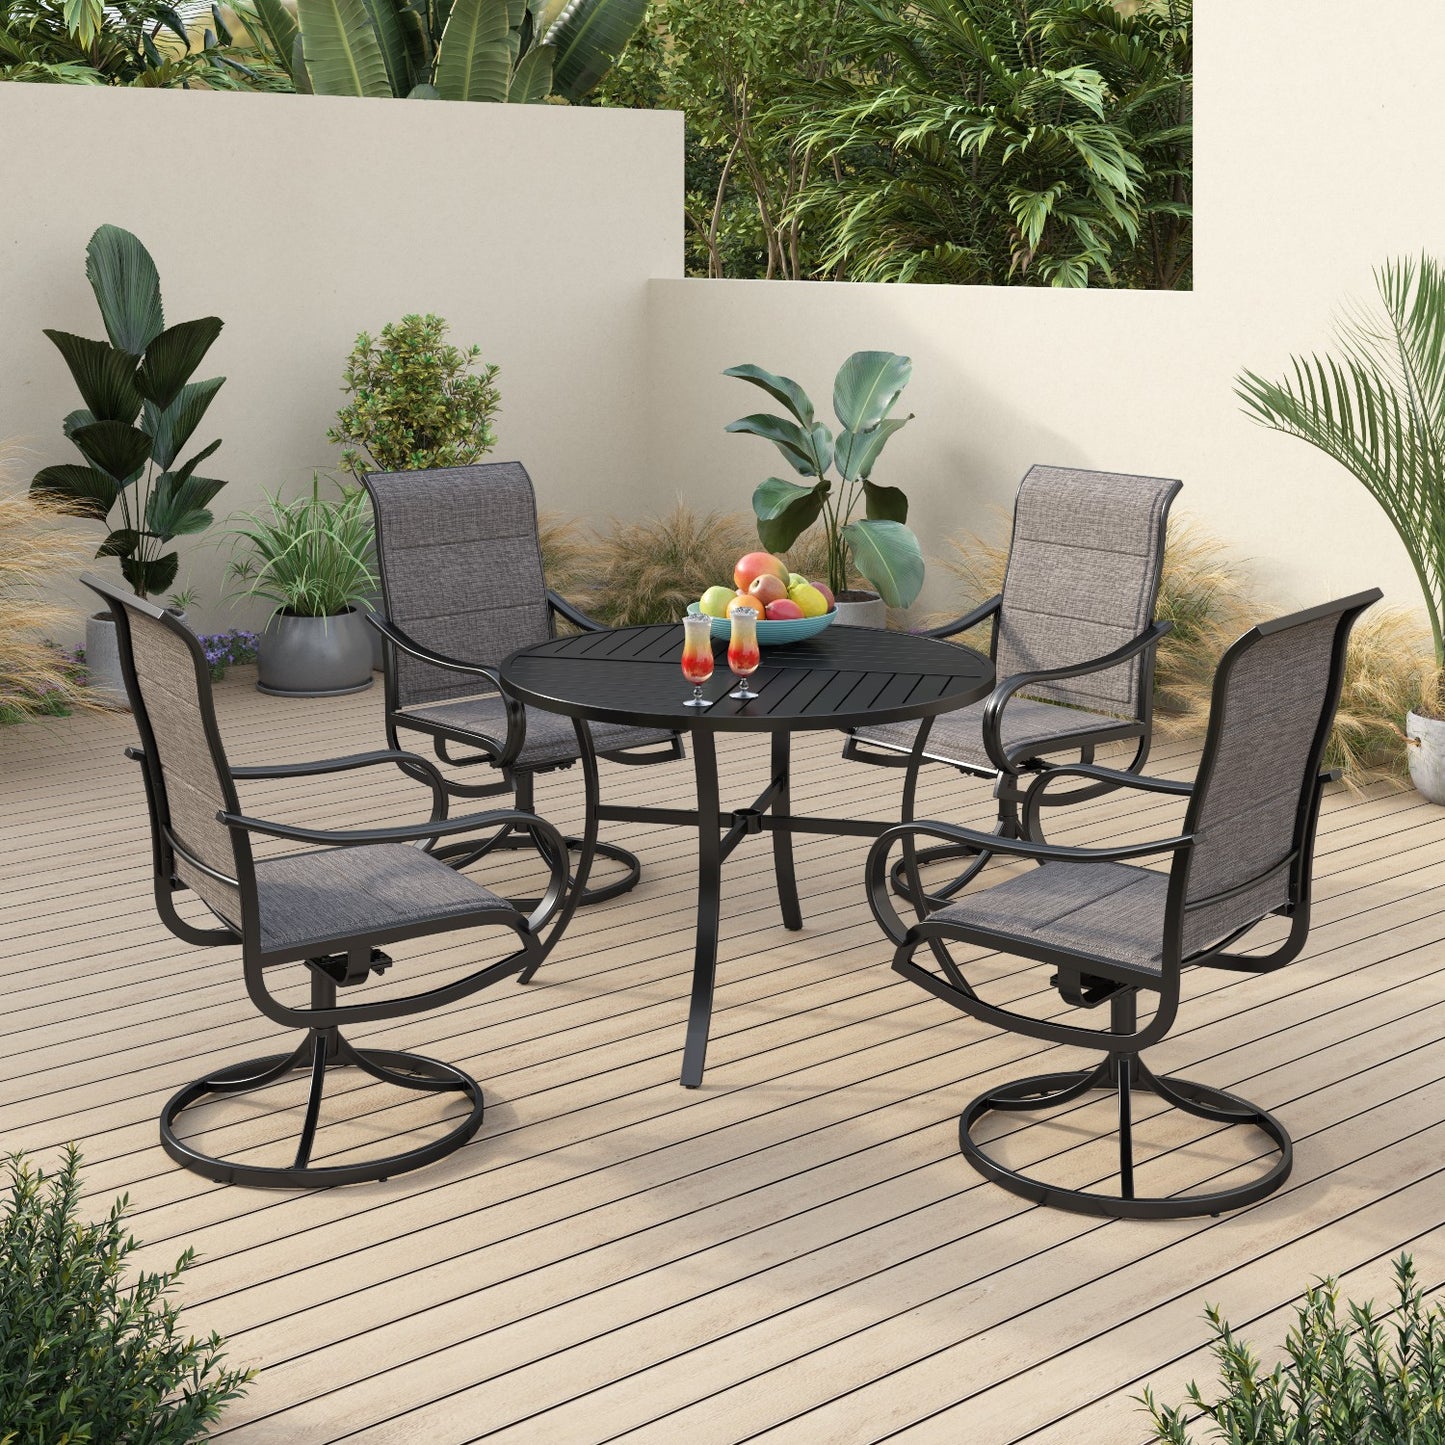 Sophia & William 5 Pieces Metal Patio Dining Set Swivel Paded Chairs and Table Set